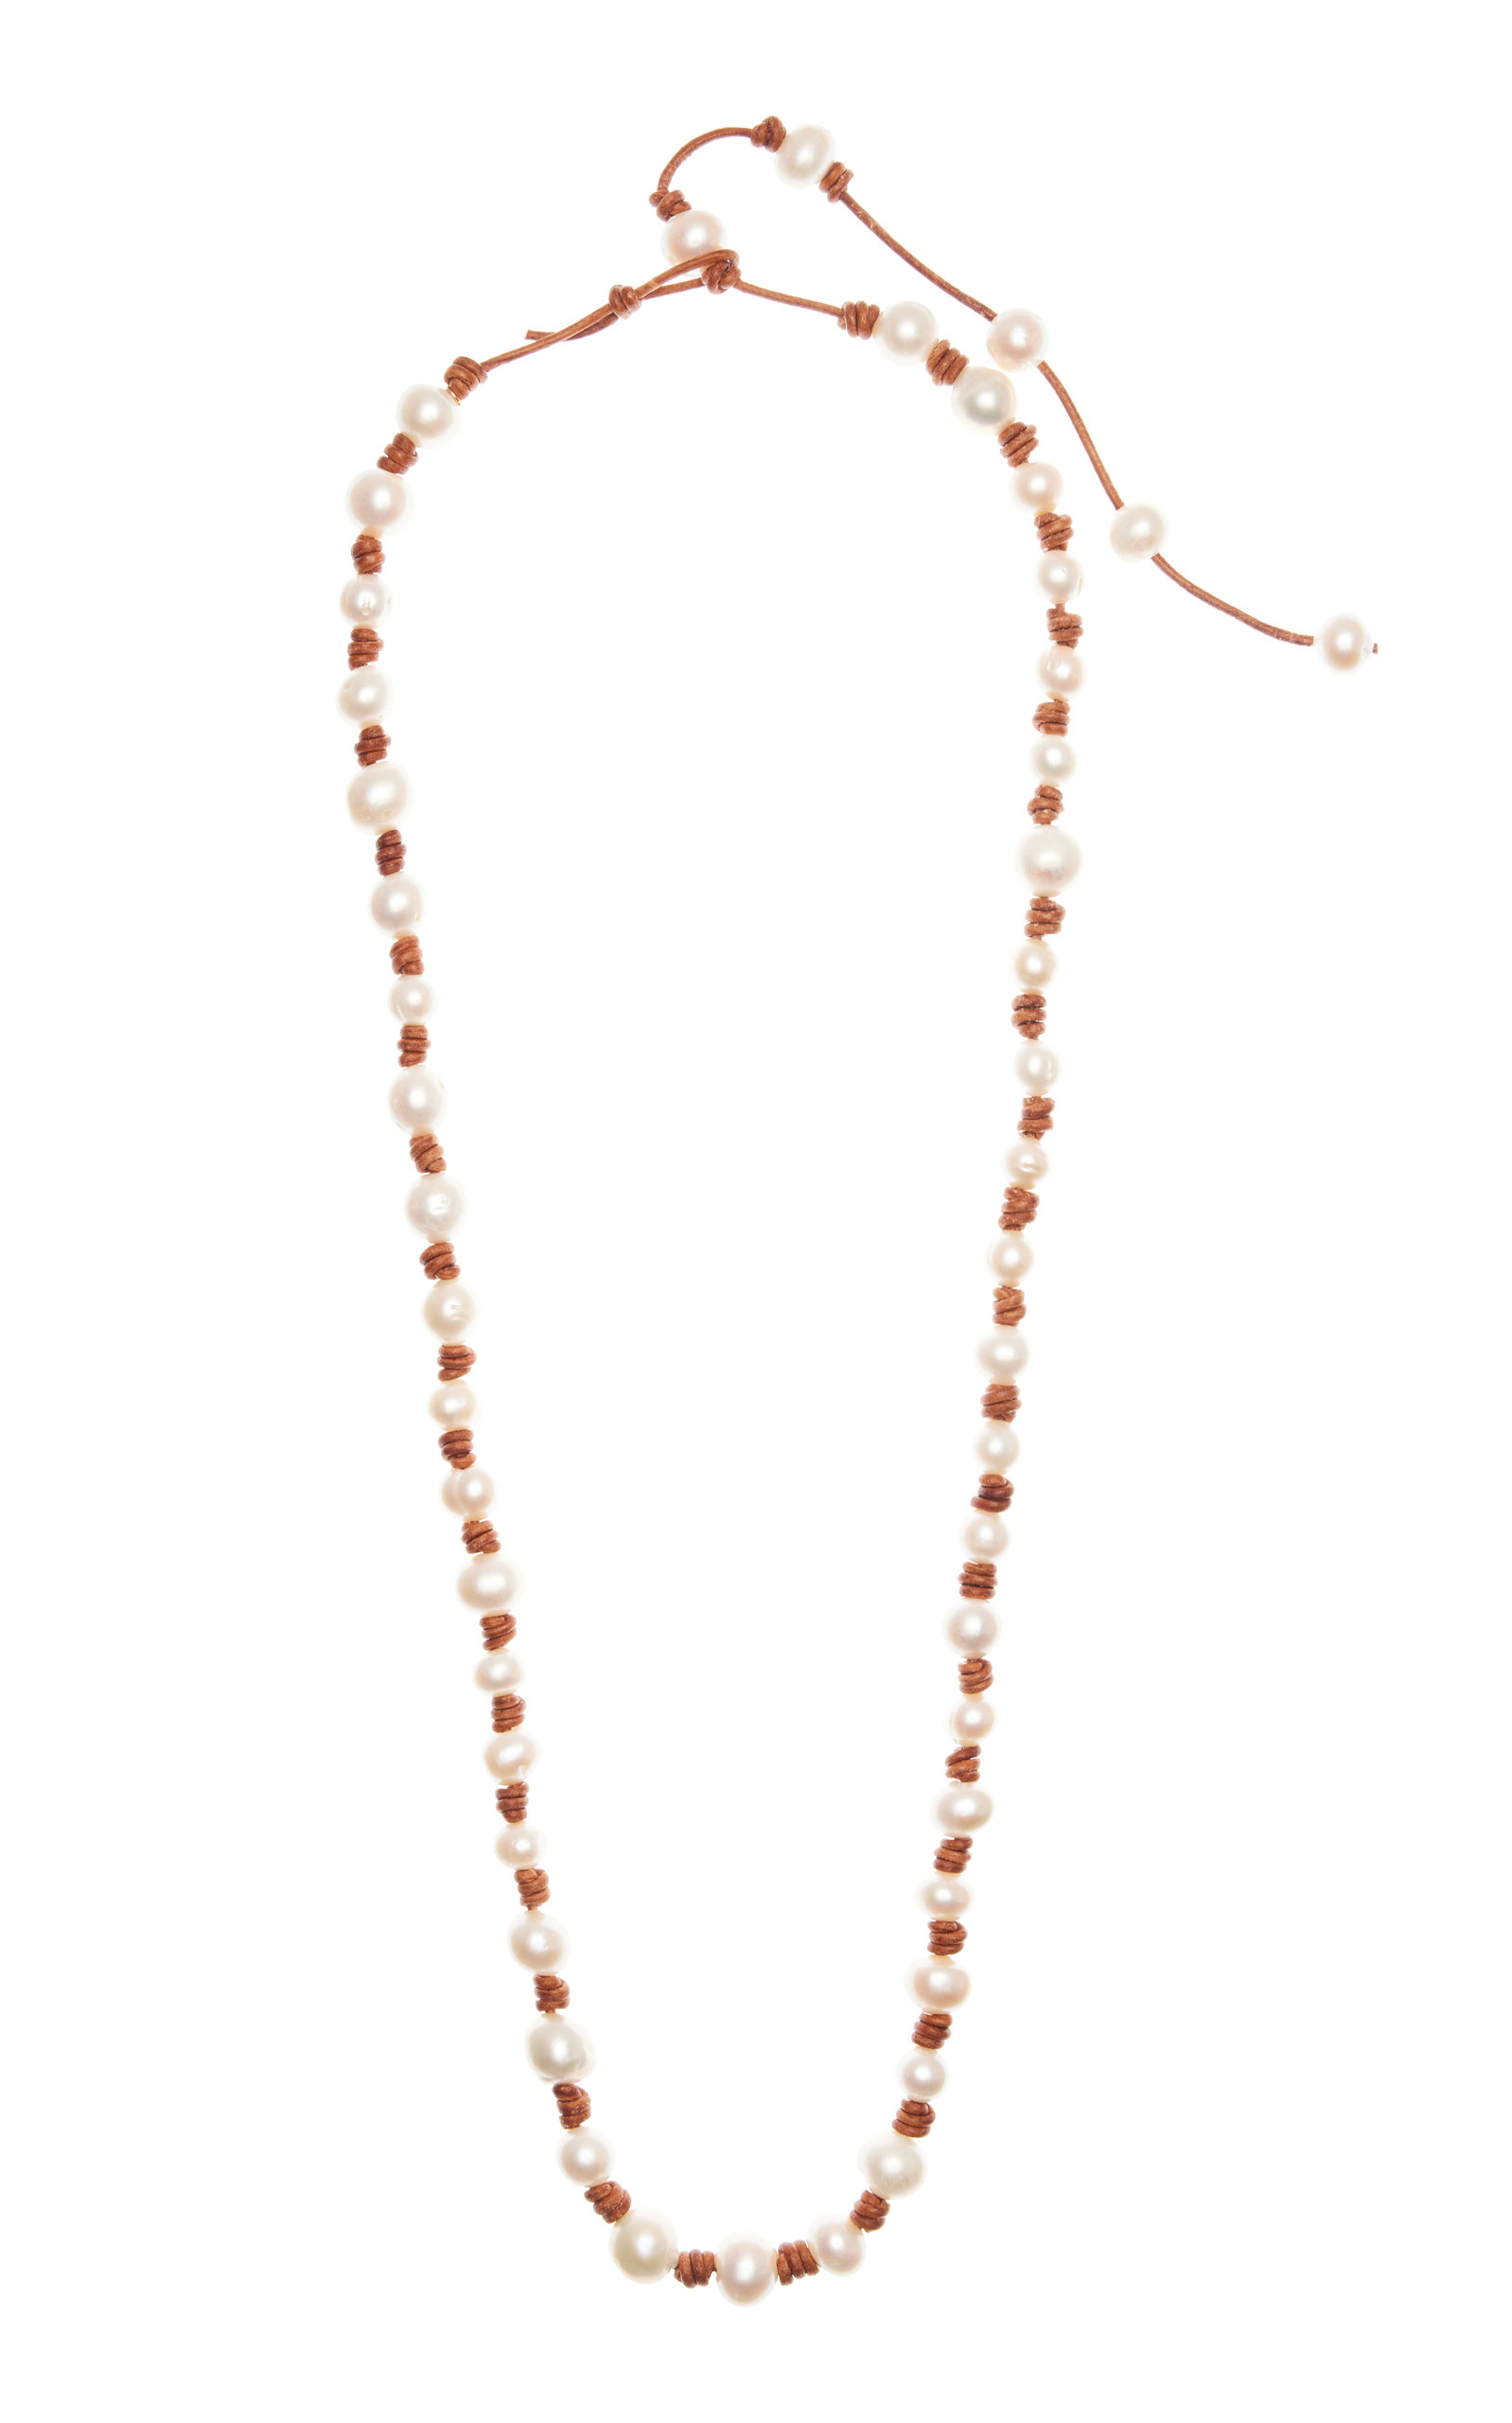 Joie DiGiovanni Women's The Ruth Pearl And Leather Necklace